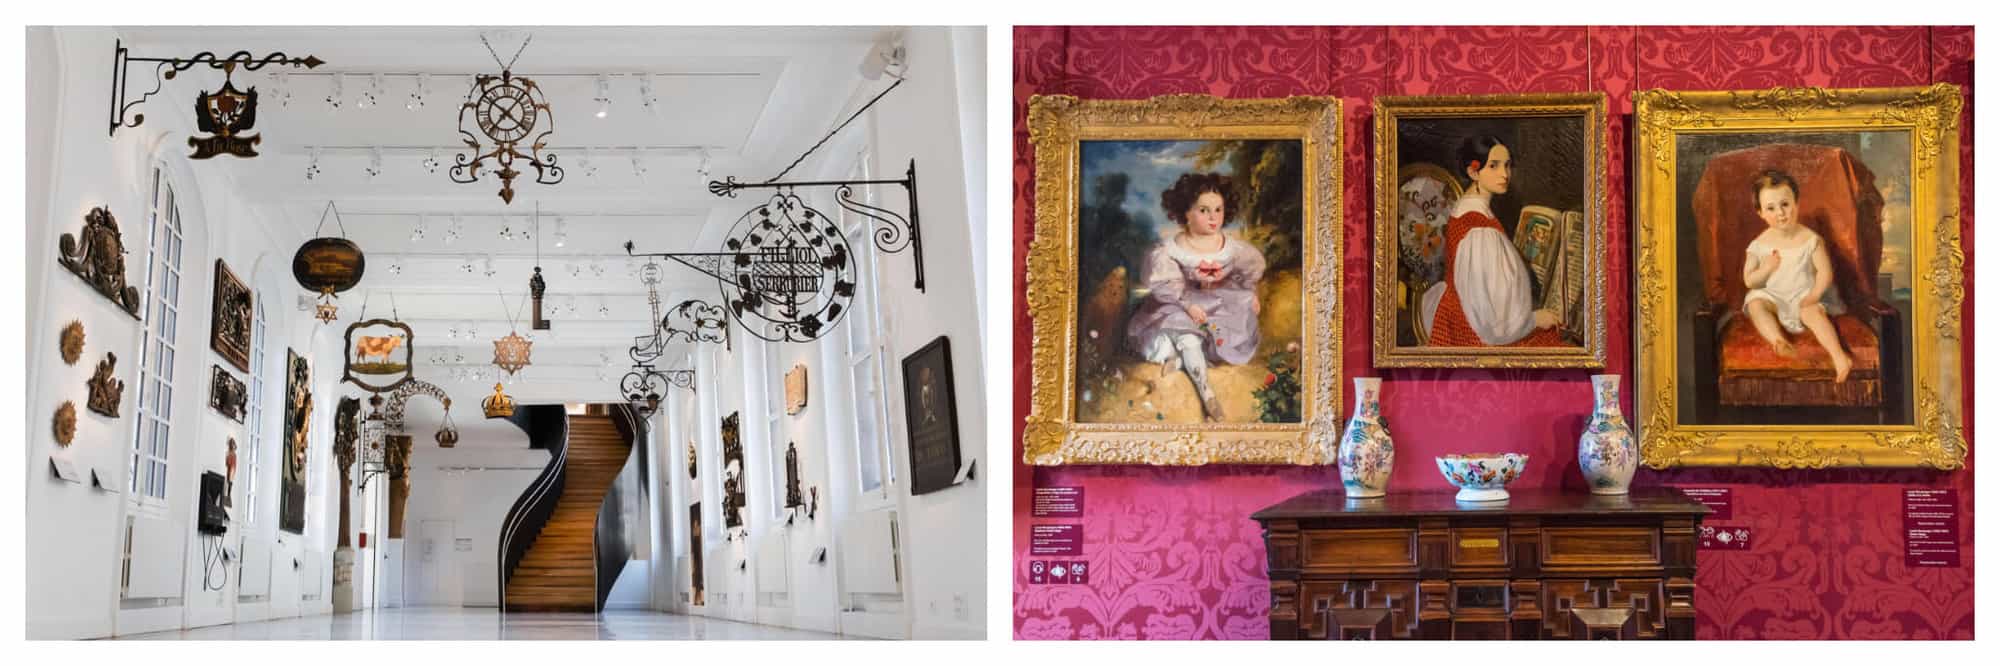 Left: an interior shot of the 'room of signs' at Musee Carnavalet. Right: an interior shot of Maison de Victor Hugo with three paintings on a red fabric covered wall.